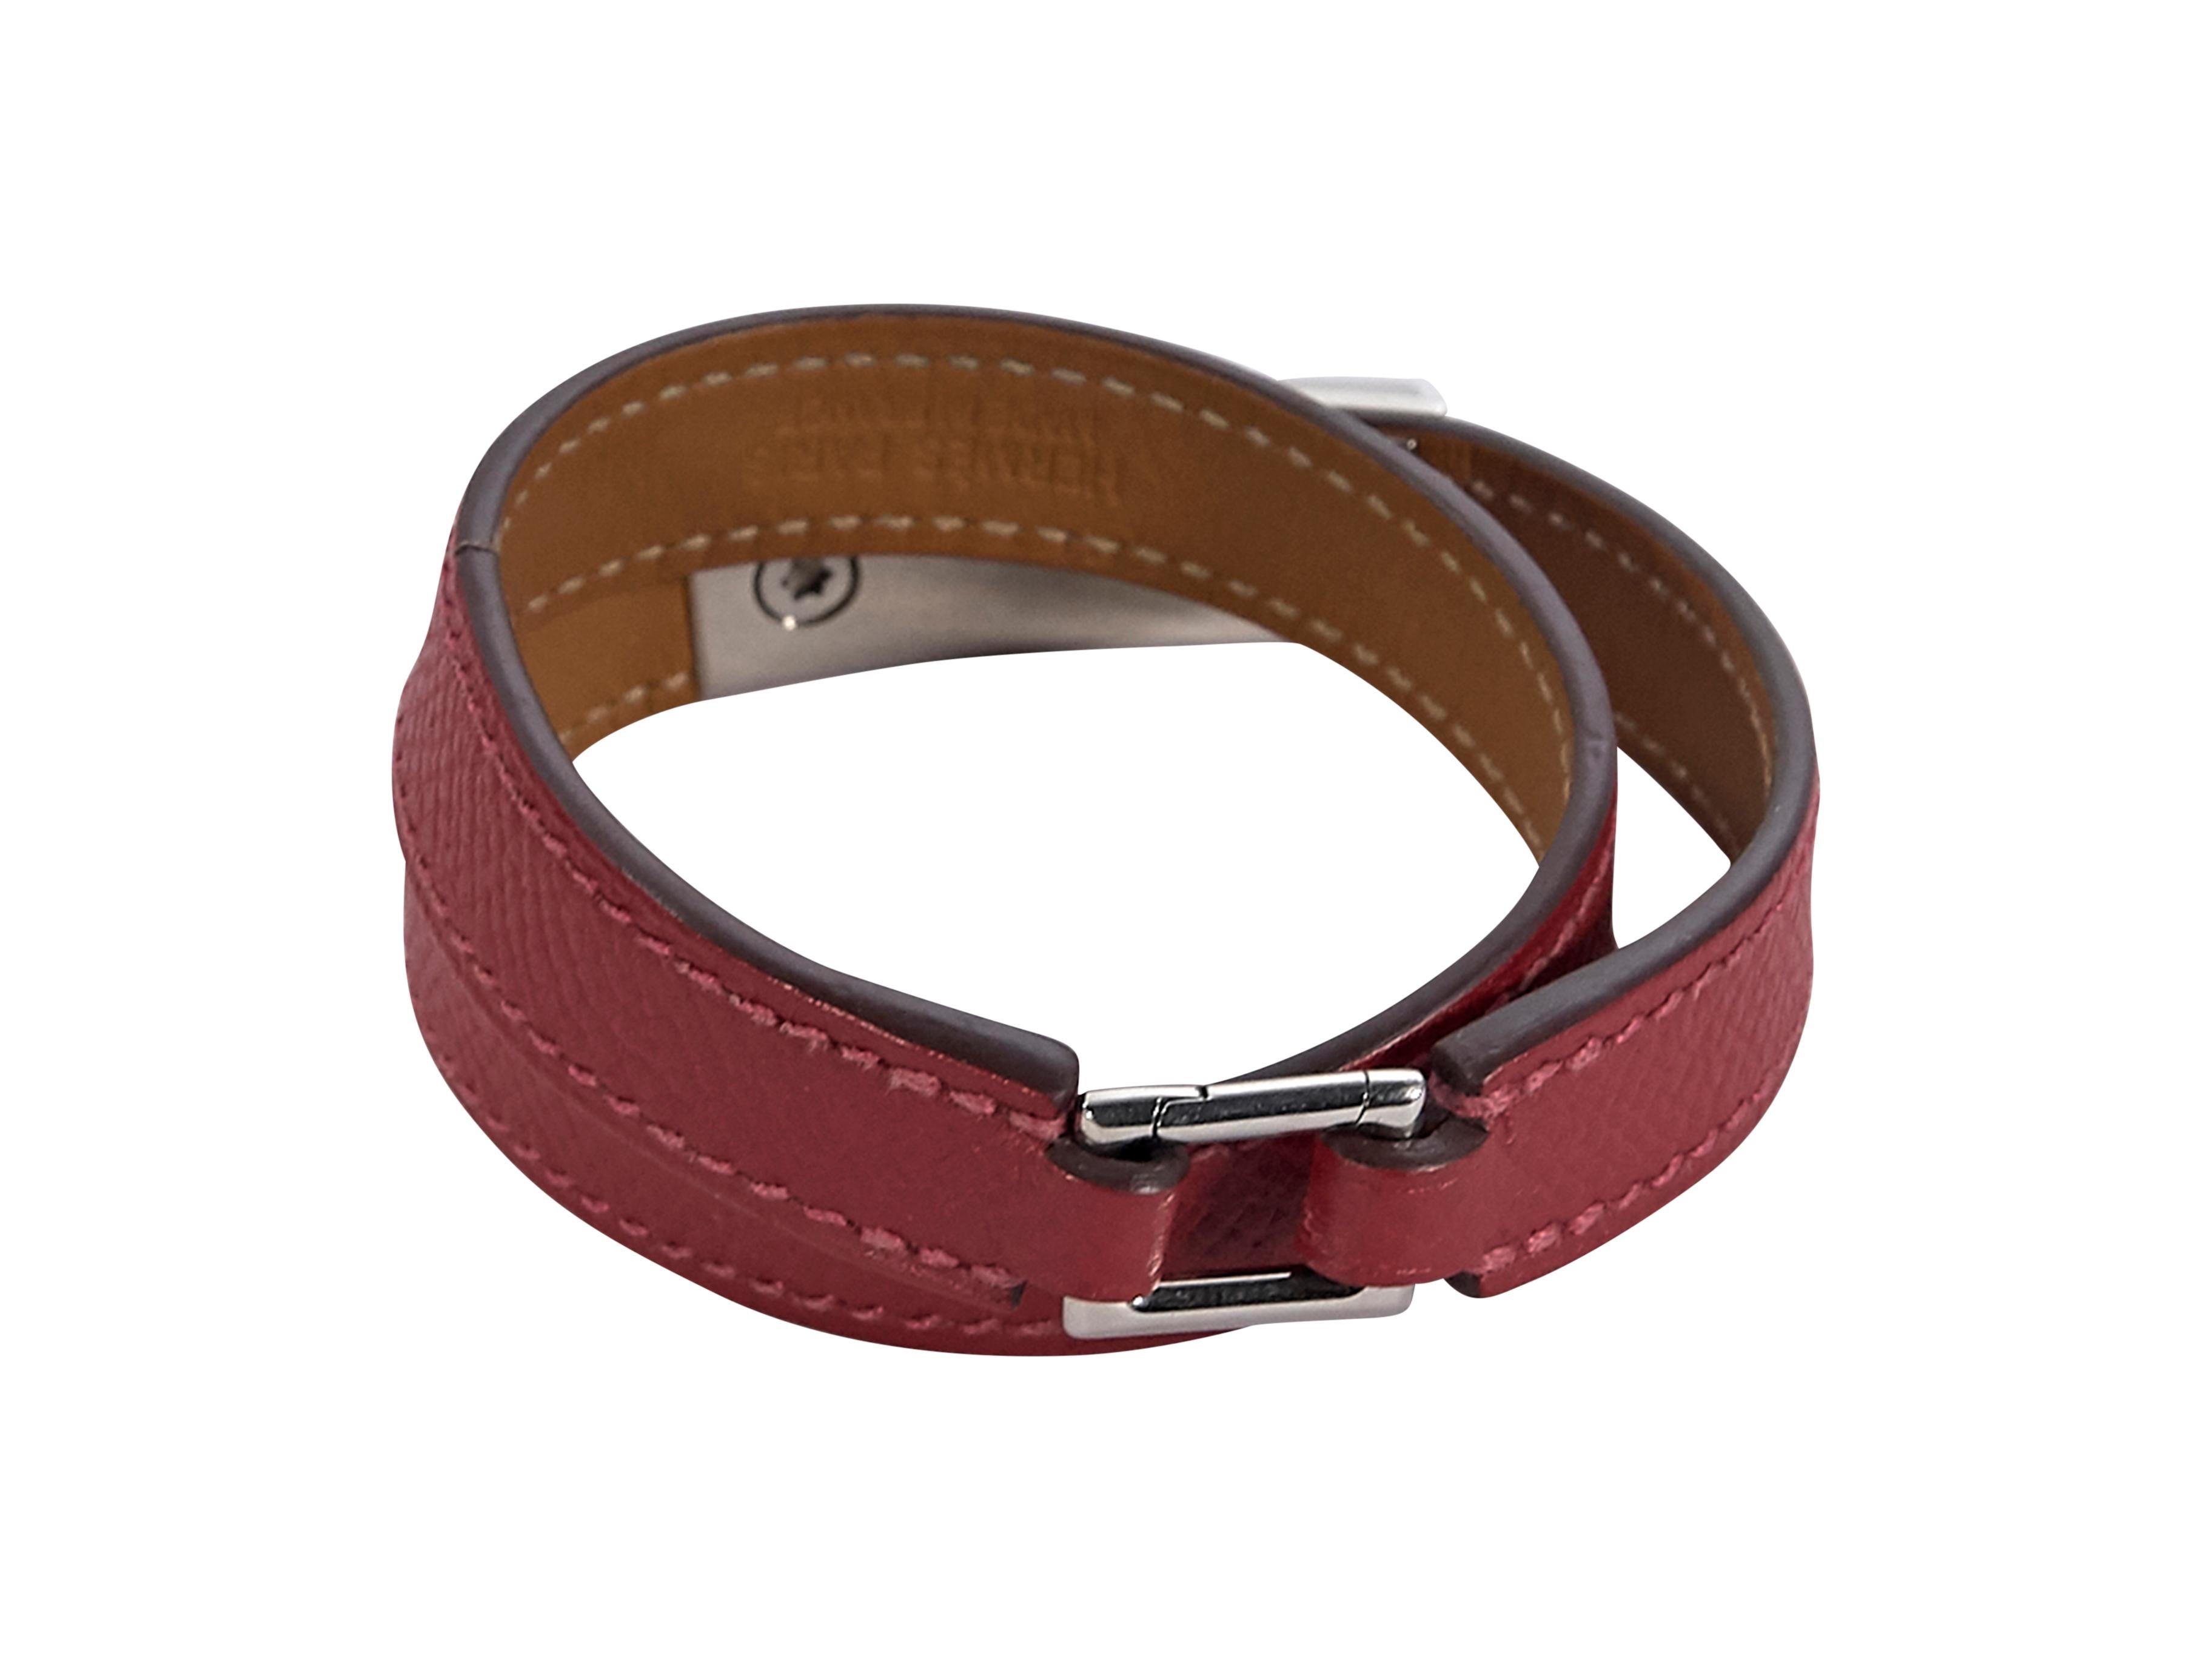 Product details:  Red leather Epsome Rivale wrap bracelet by Hermes.  Square clasp closure.  Silvertone hardware.  13.5